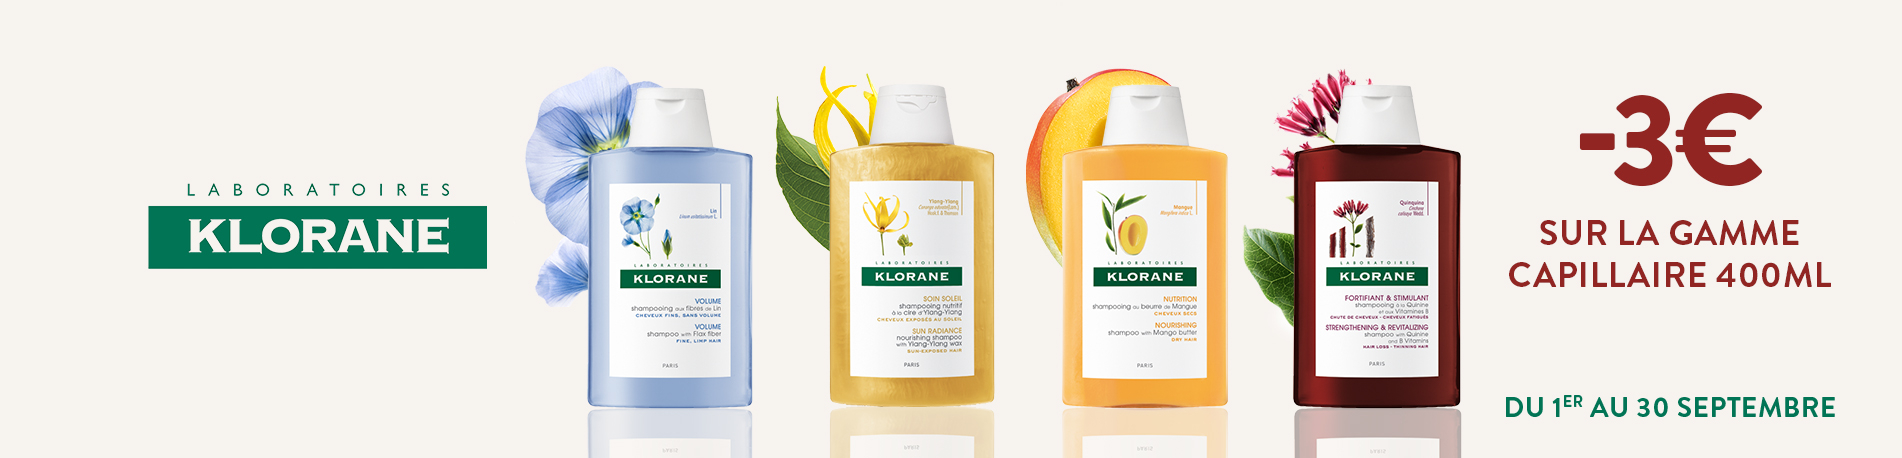 Promotion Klorane gamme capillaire